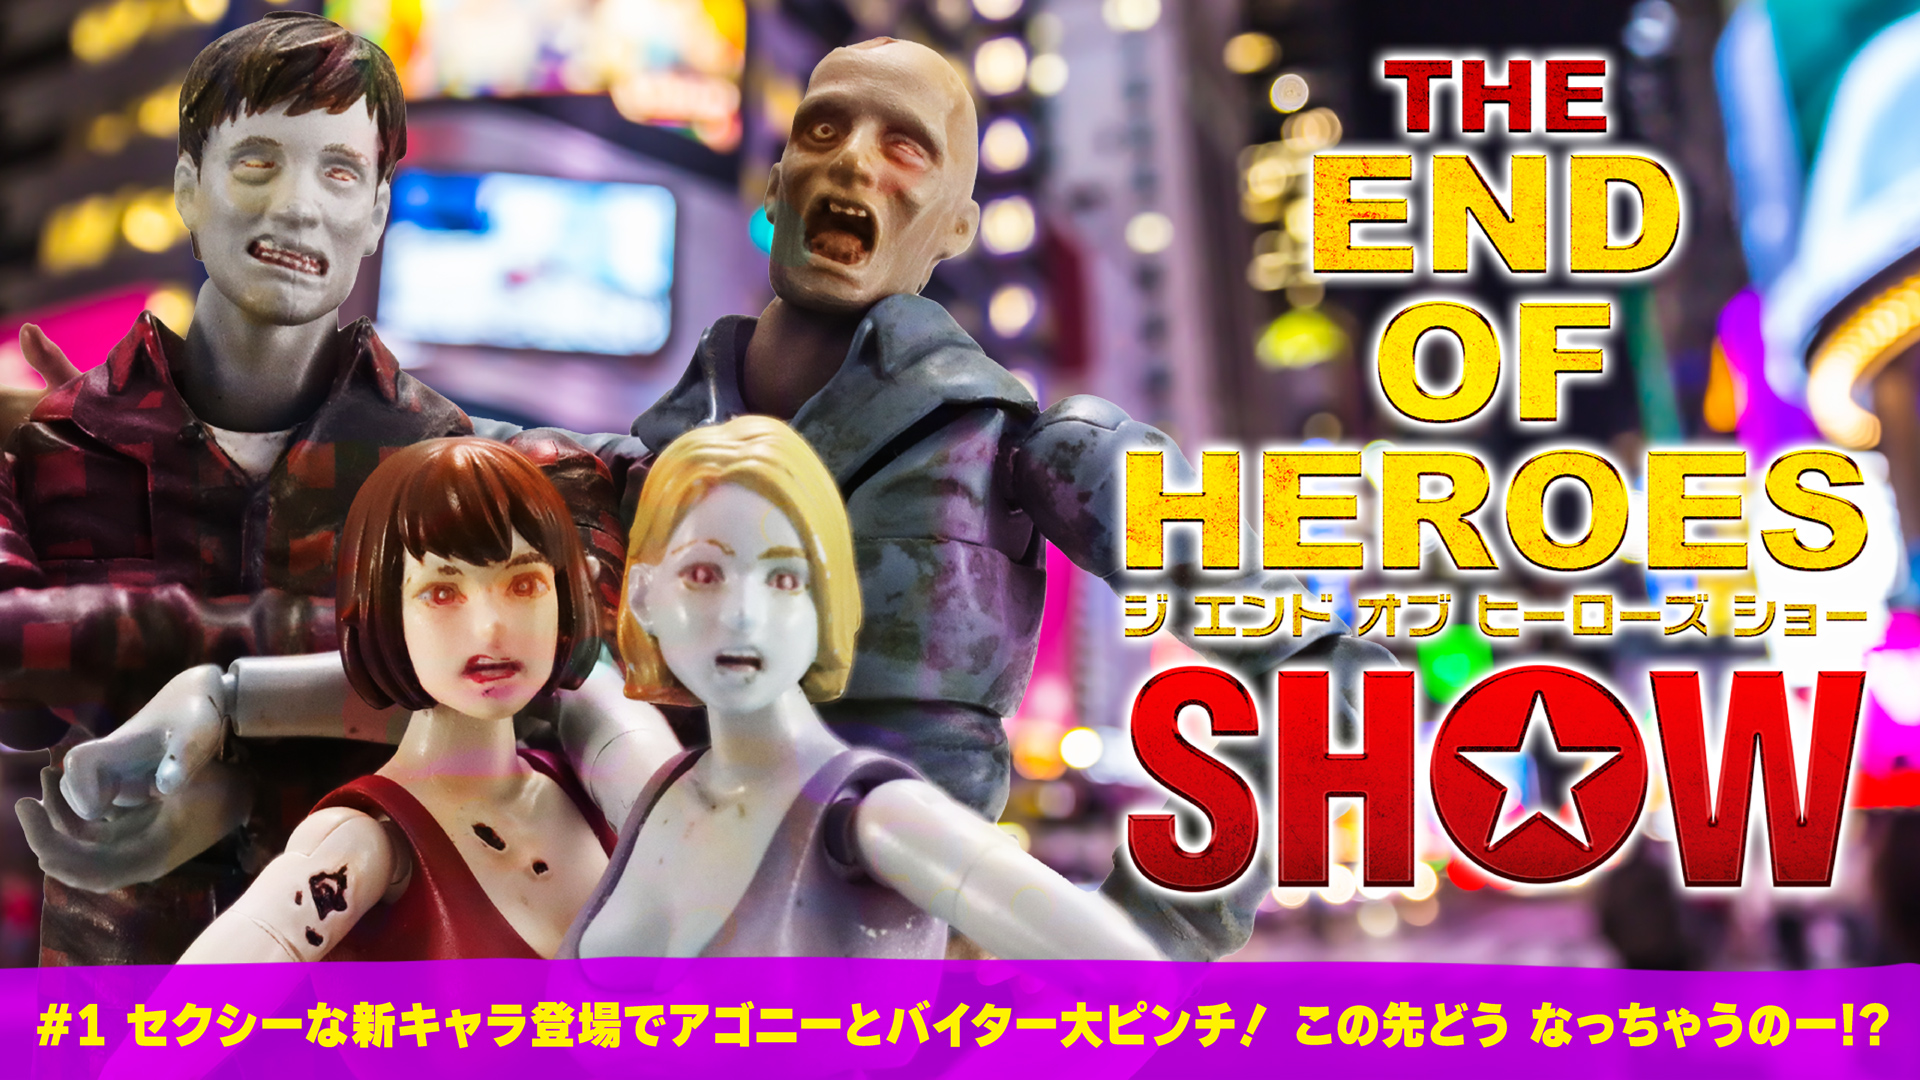 THE END OF HEROES SHOW！